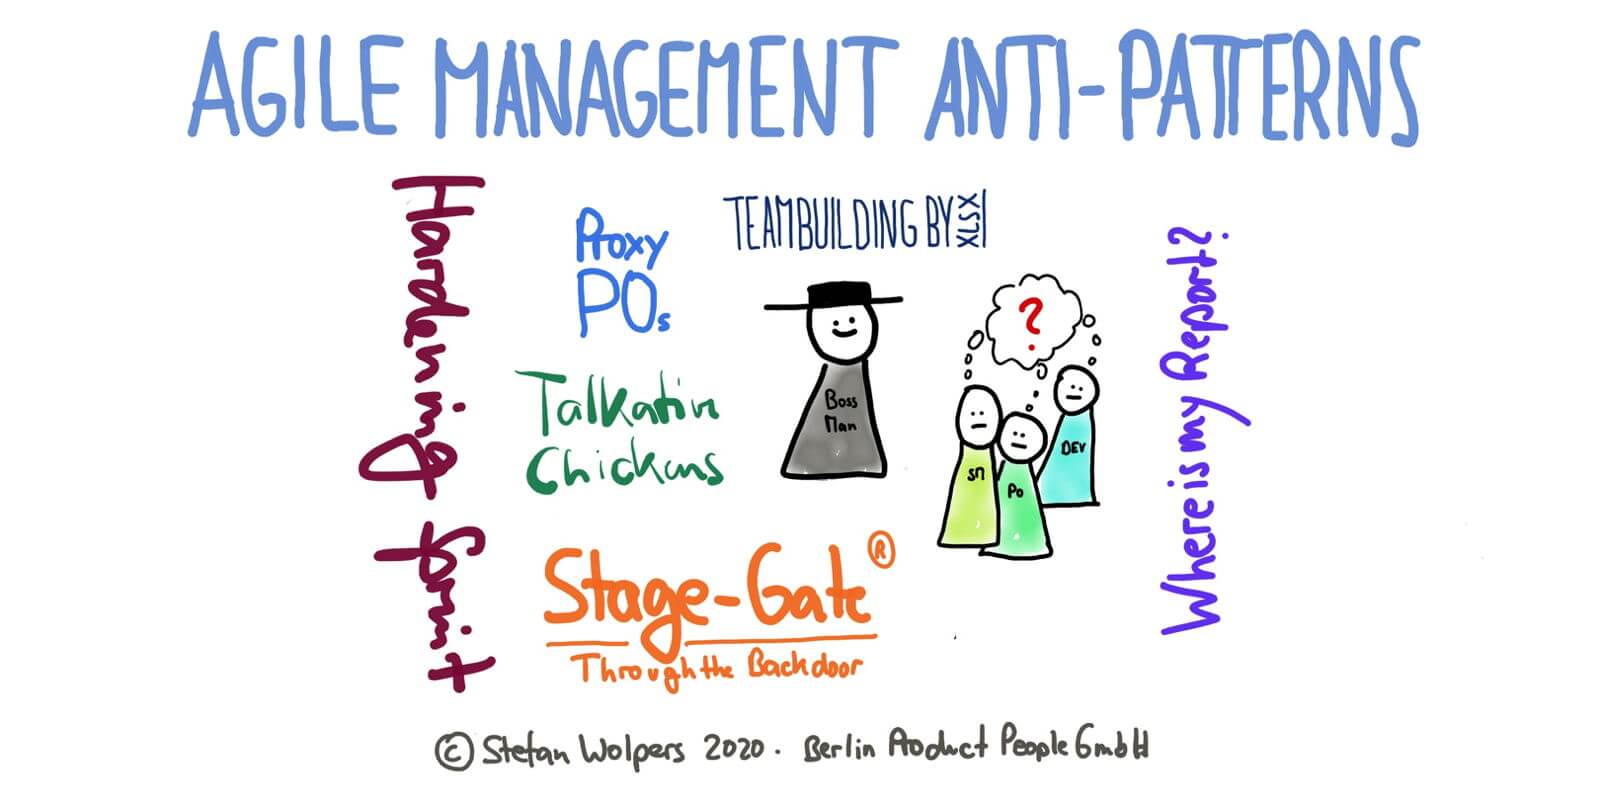 Agile Management Anti-Patterns: An Introduction for the Aspiring Servant Leader — Age-of-Product.com